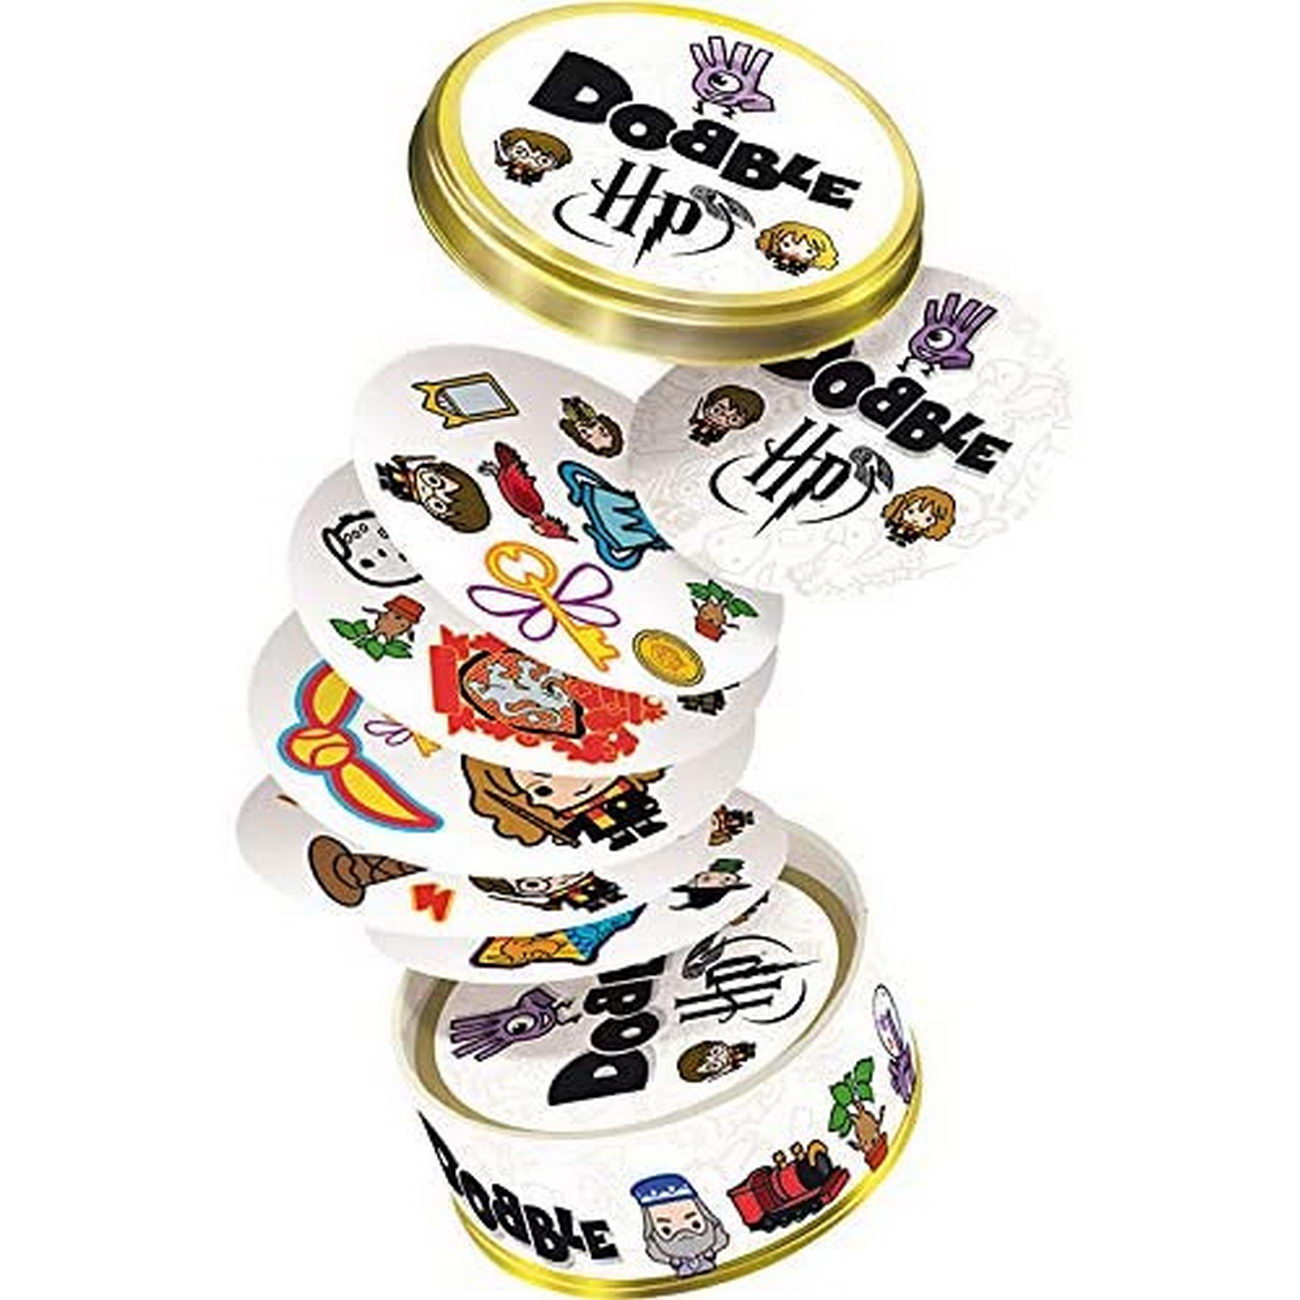 Dobble Harry Potter (Asmodee ASMD0050)